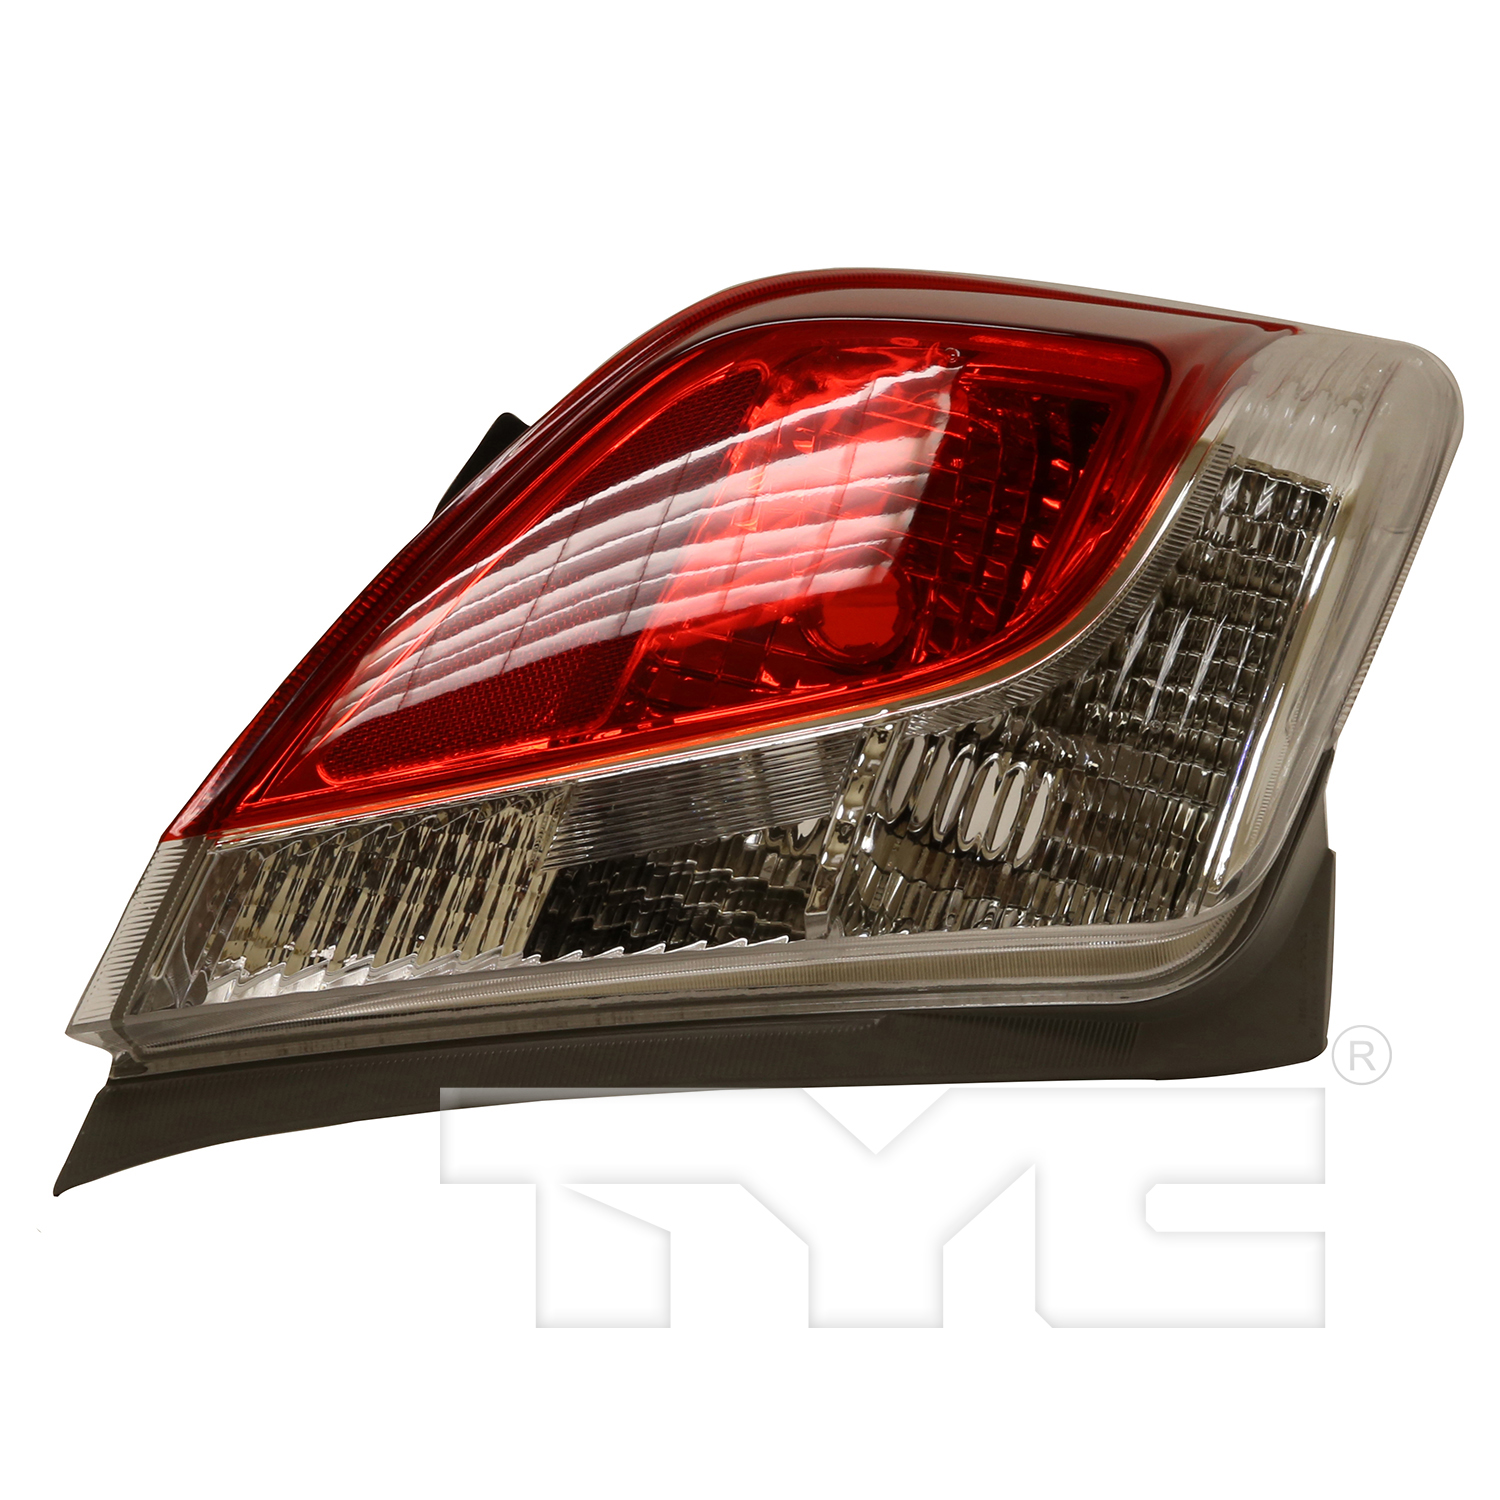 Aftermarket TAILLIGHTS for TOYOTA - YARIS, YARIS,12-14,LT Taillamp lens/housing